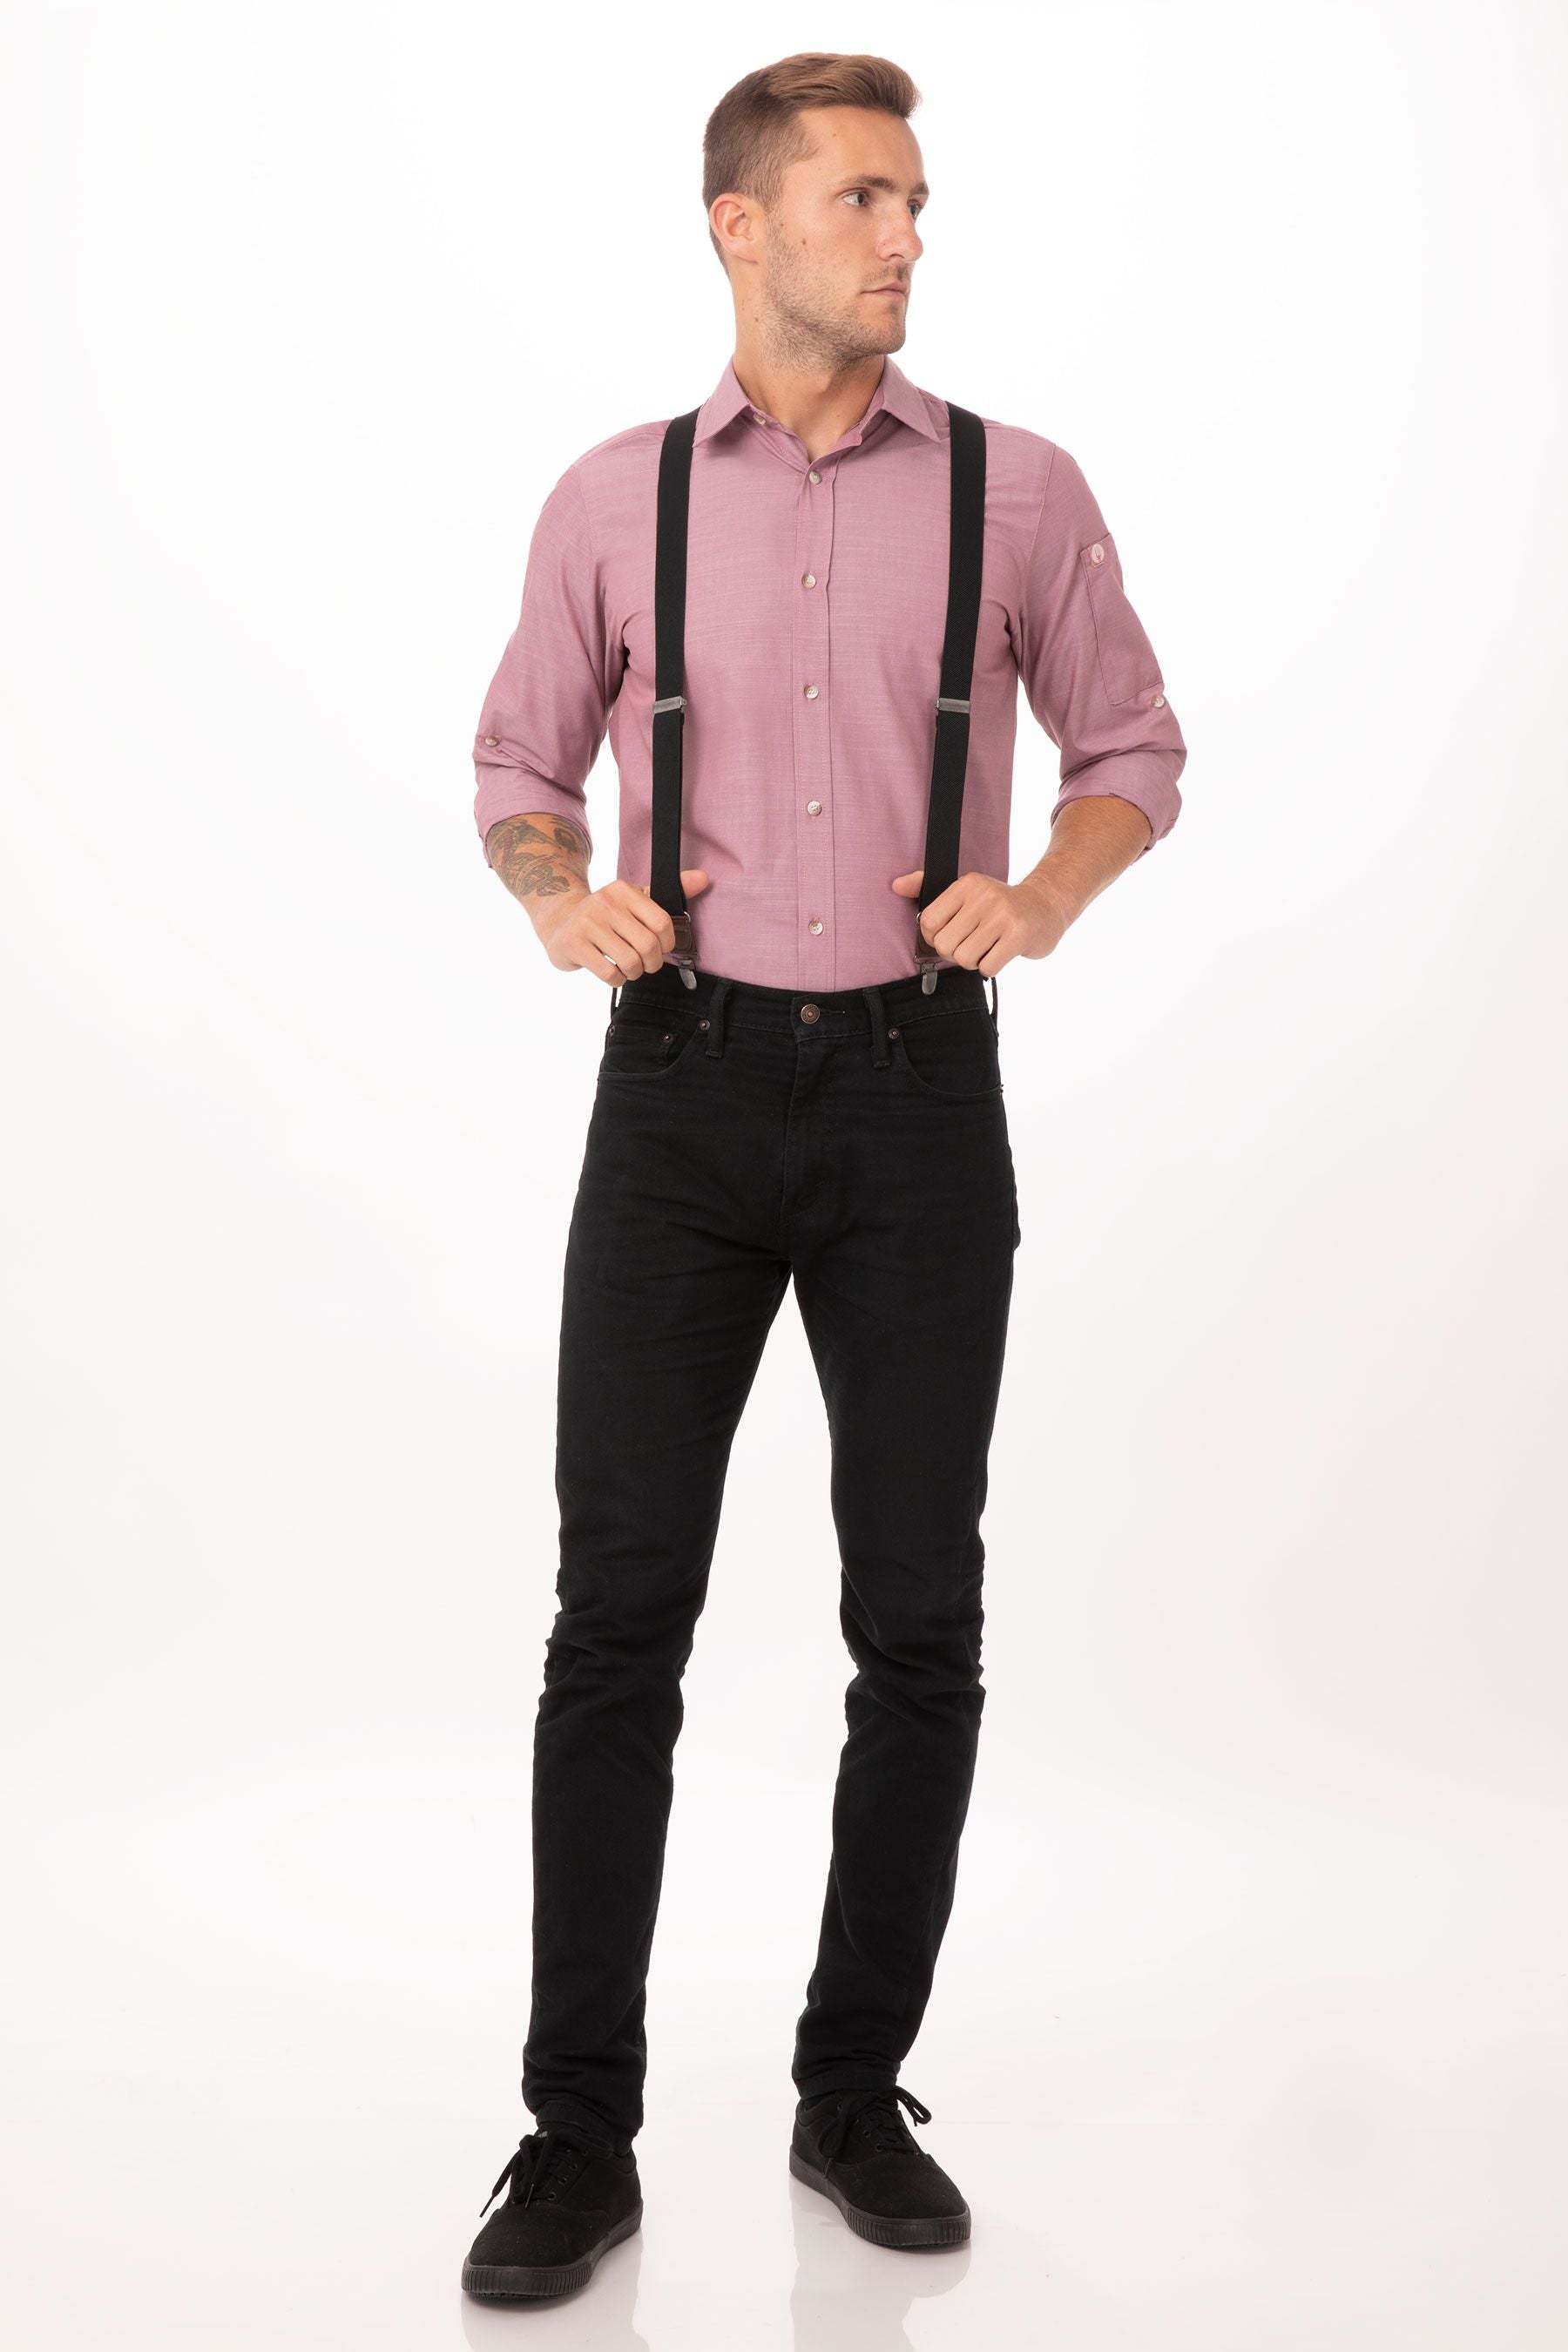 Pant Suspenders: Striped | CHEF WORKS APPAREL SDN BHD